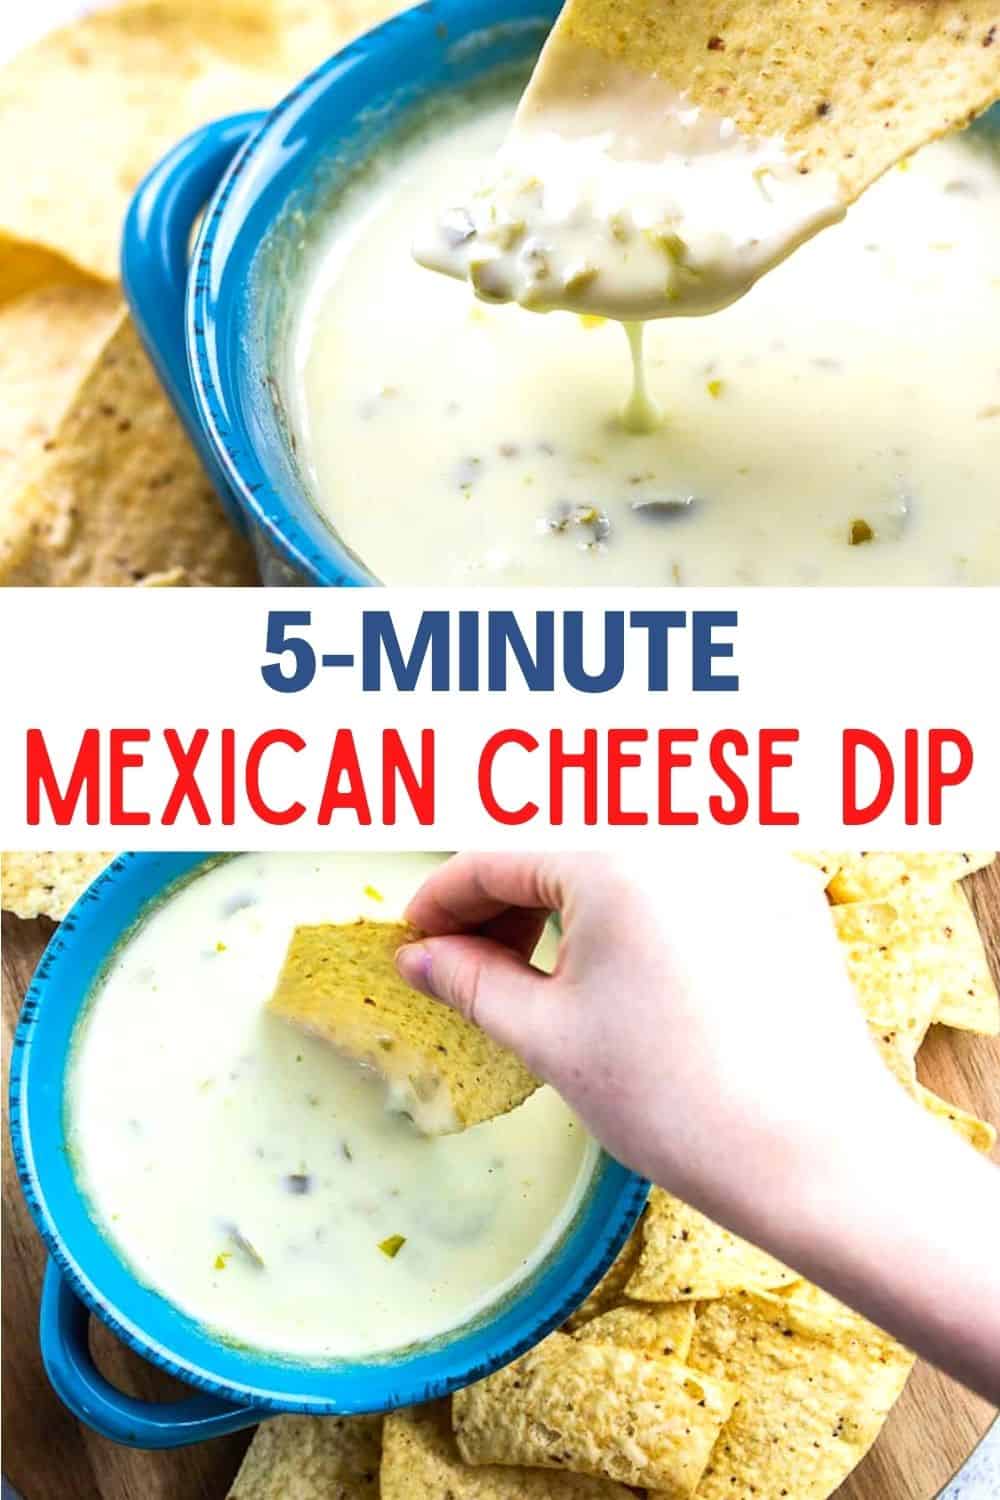 This white cheese dip is an original Mexican restaurant recipe. Only 4 ingredients and 5 minutes for an EASY and authentic queso blanco dip!